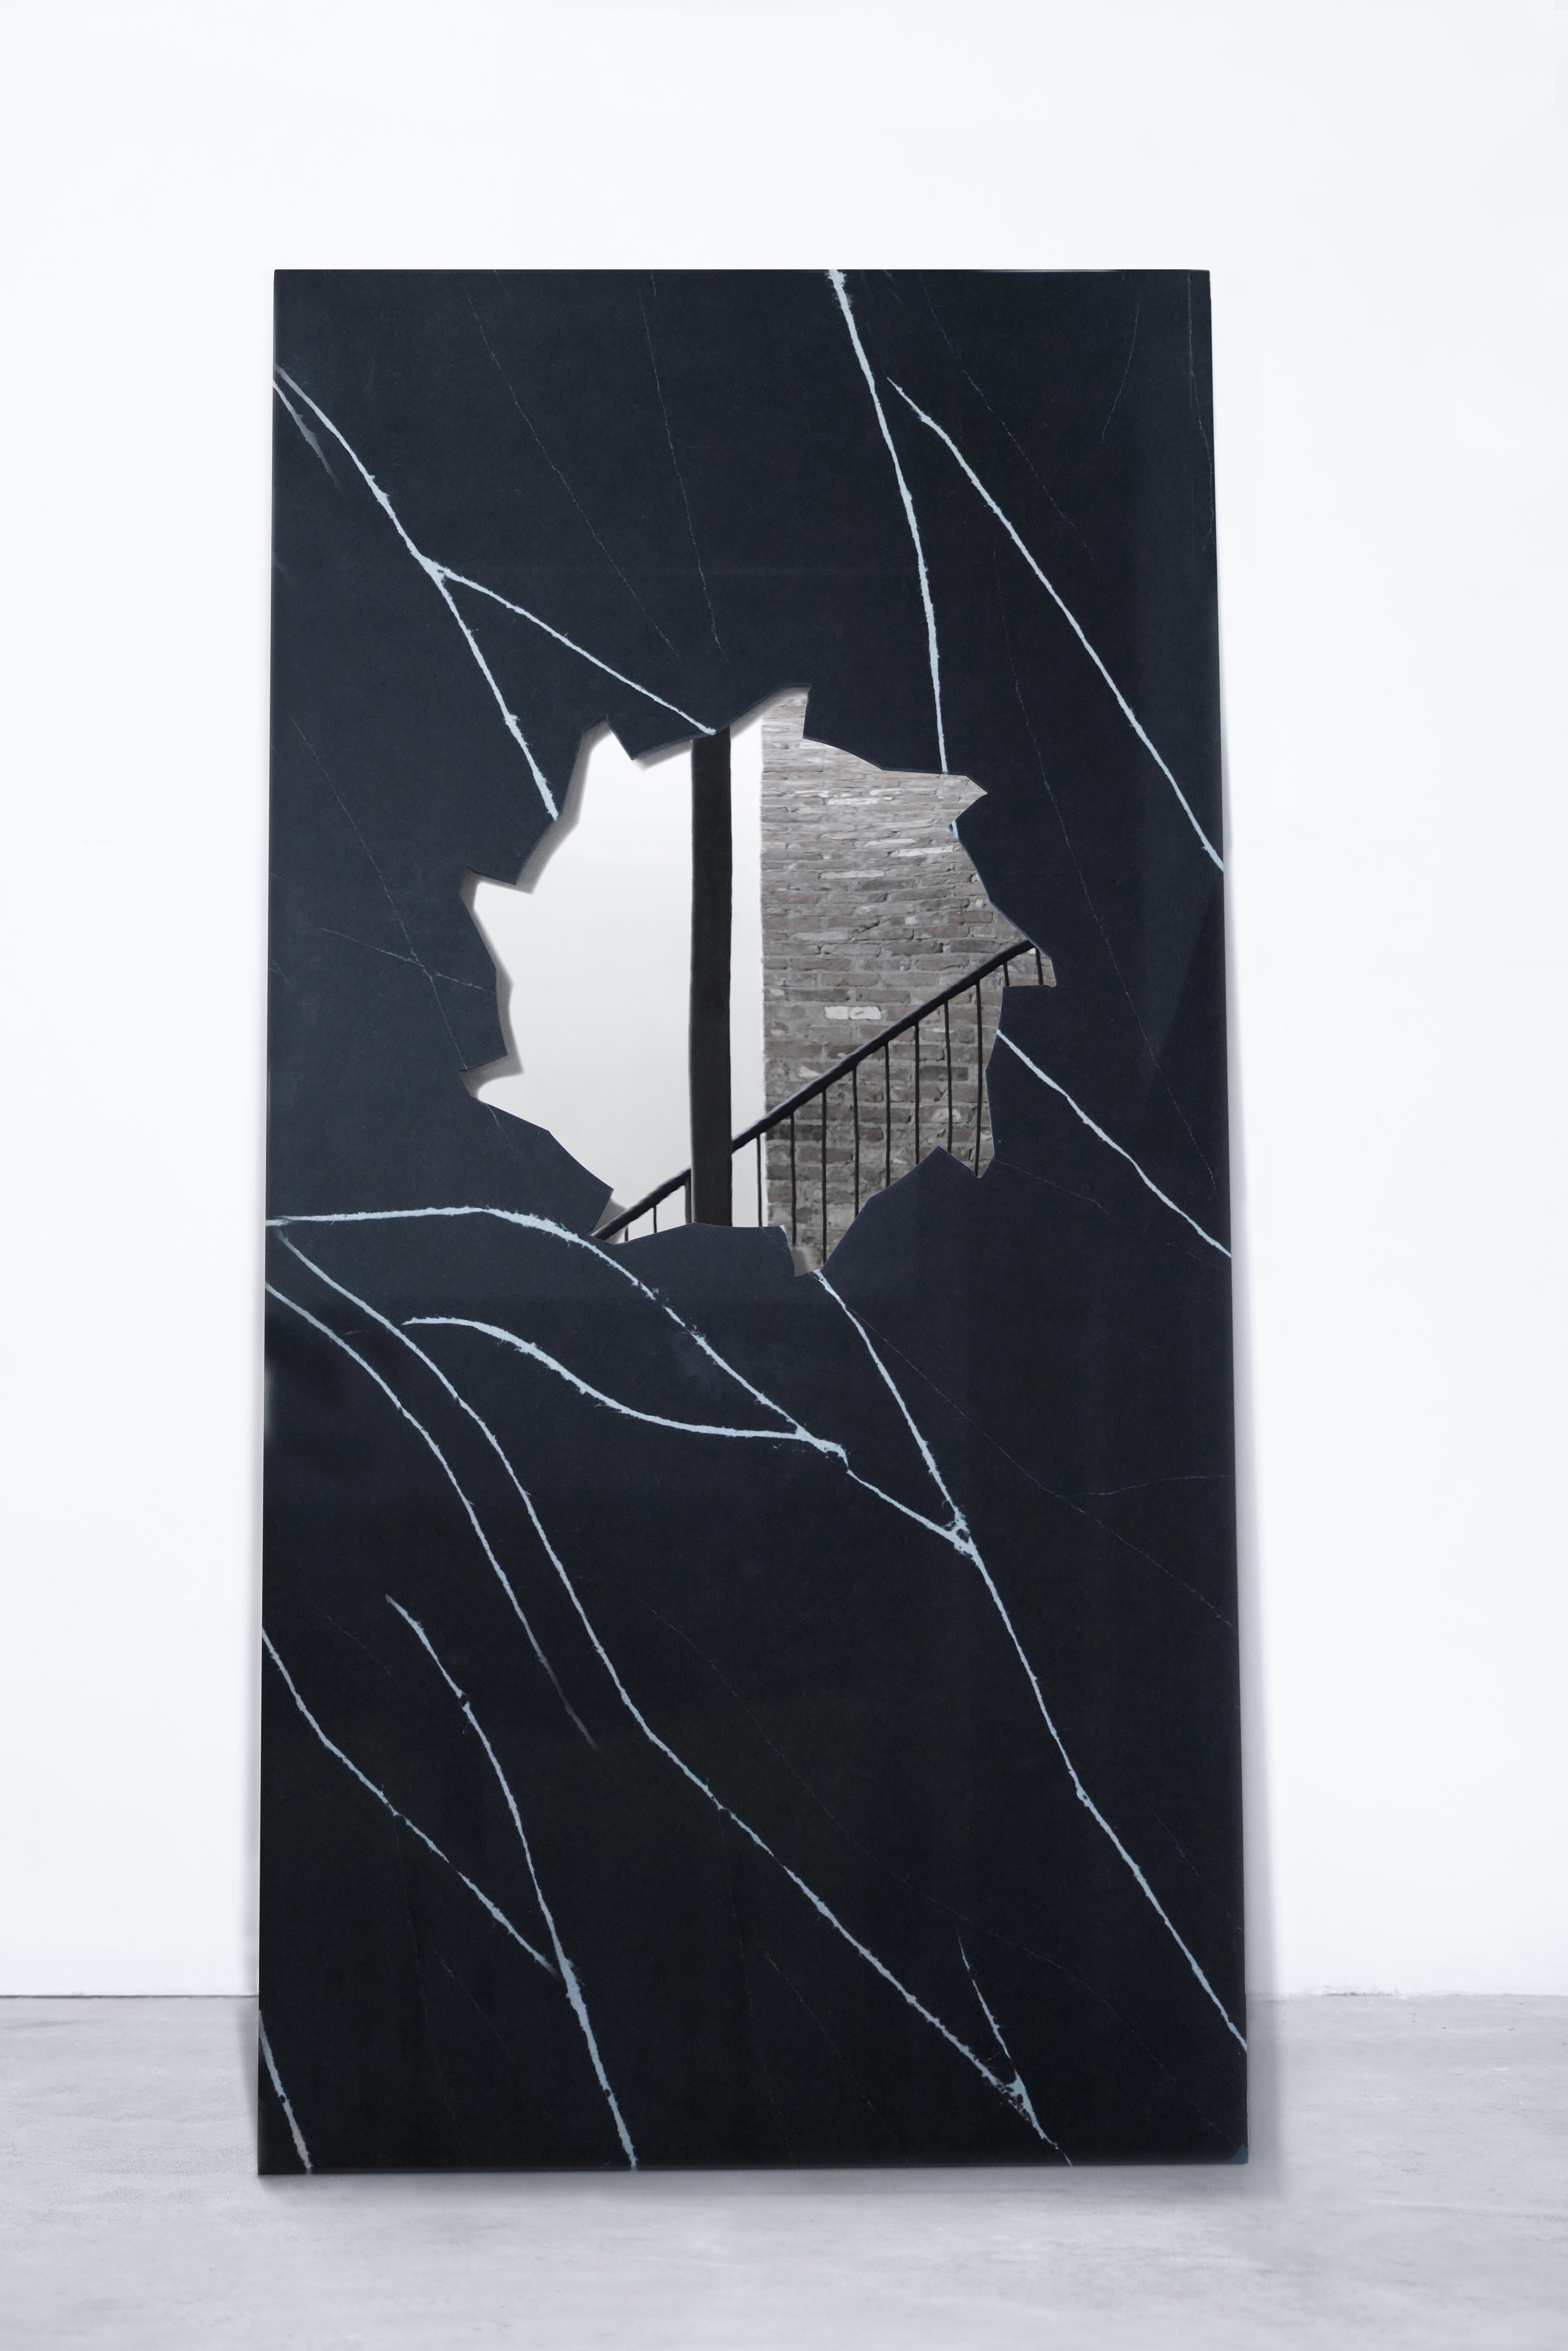 Description
Monumental nero marquina marble slab with a waterjet cut buzzsaw relief + mirror inlay.
Lean against a sturdy, flat wall.
Made to order in NYC.

Dimension
Buzzsaw mirror diameter 34.5”
Length 108” 
Width 58” 
Thickness .75”.